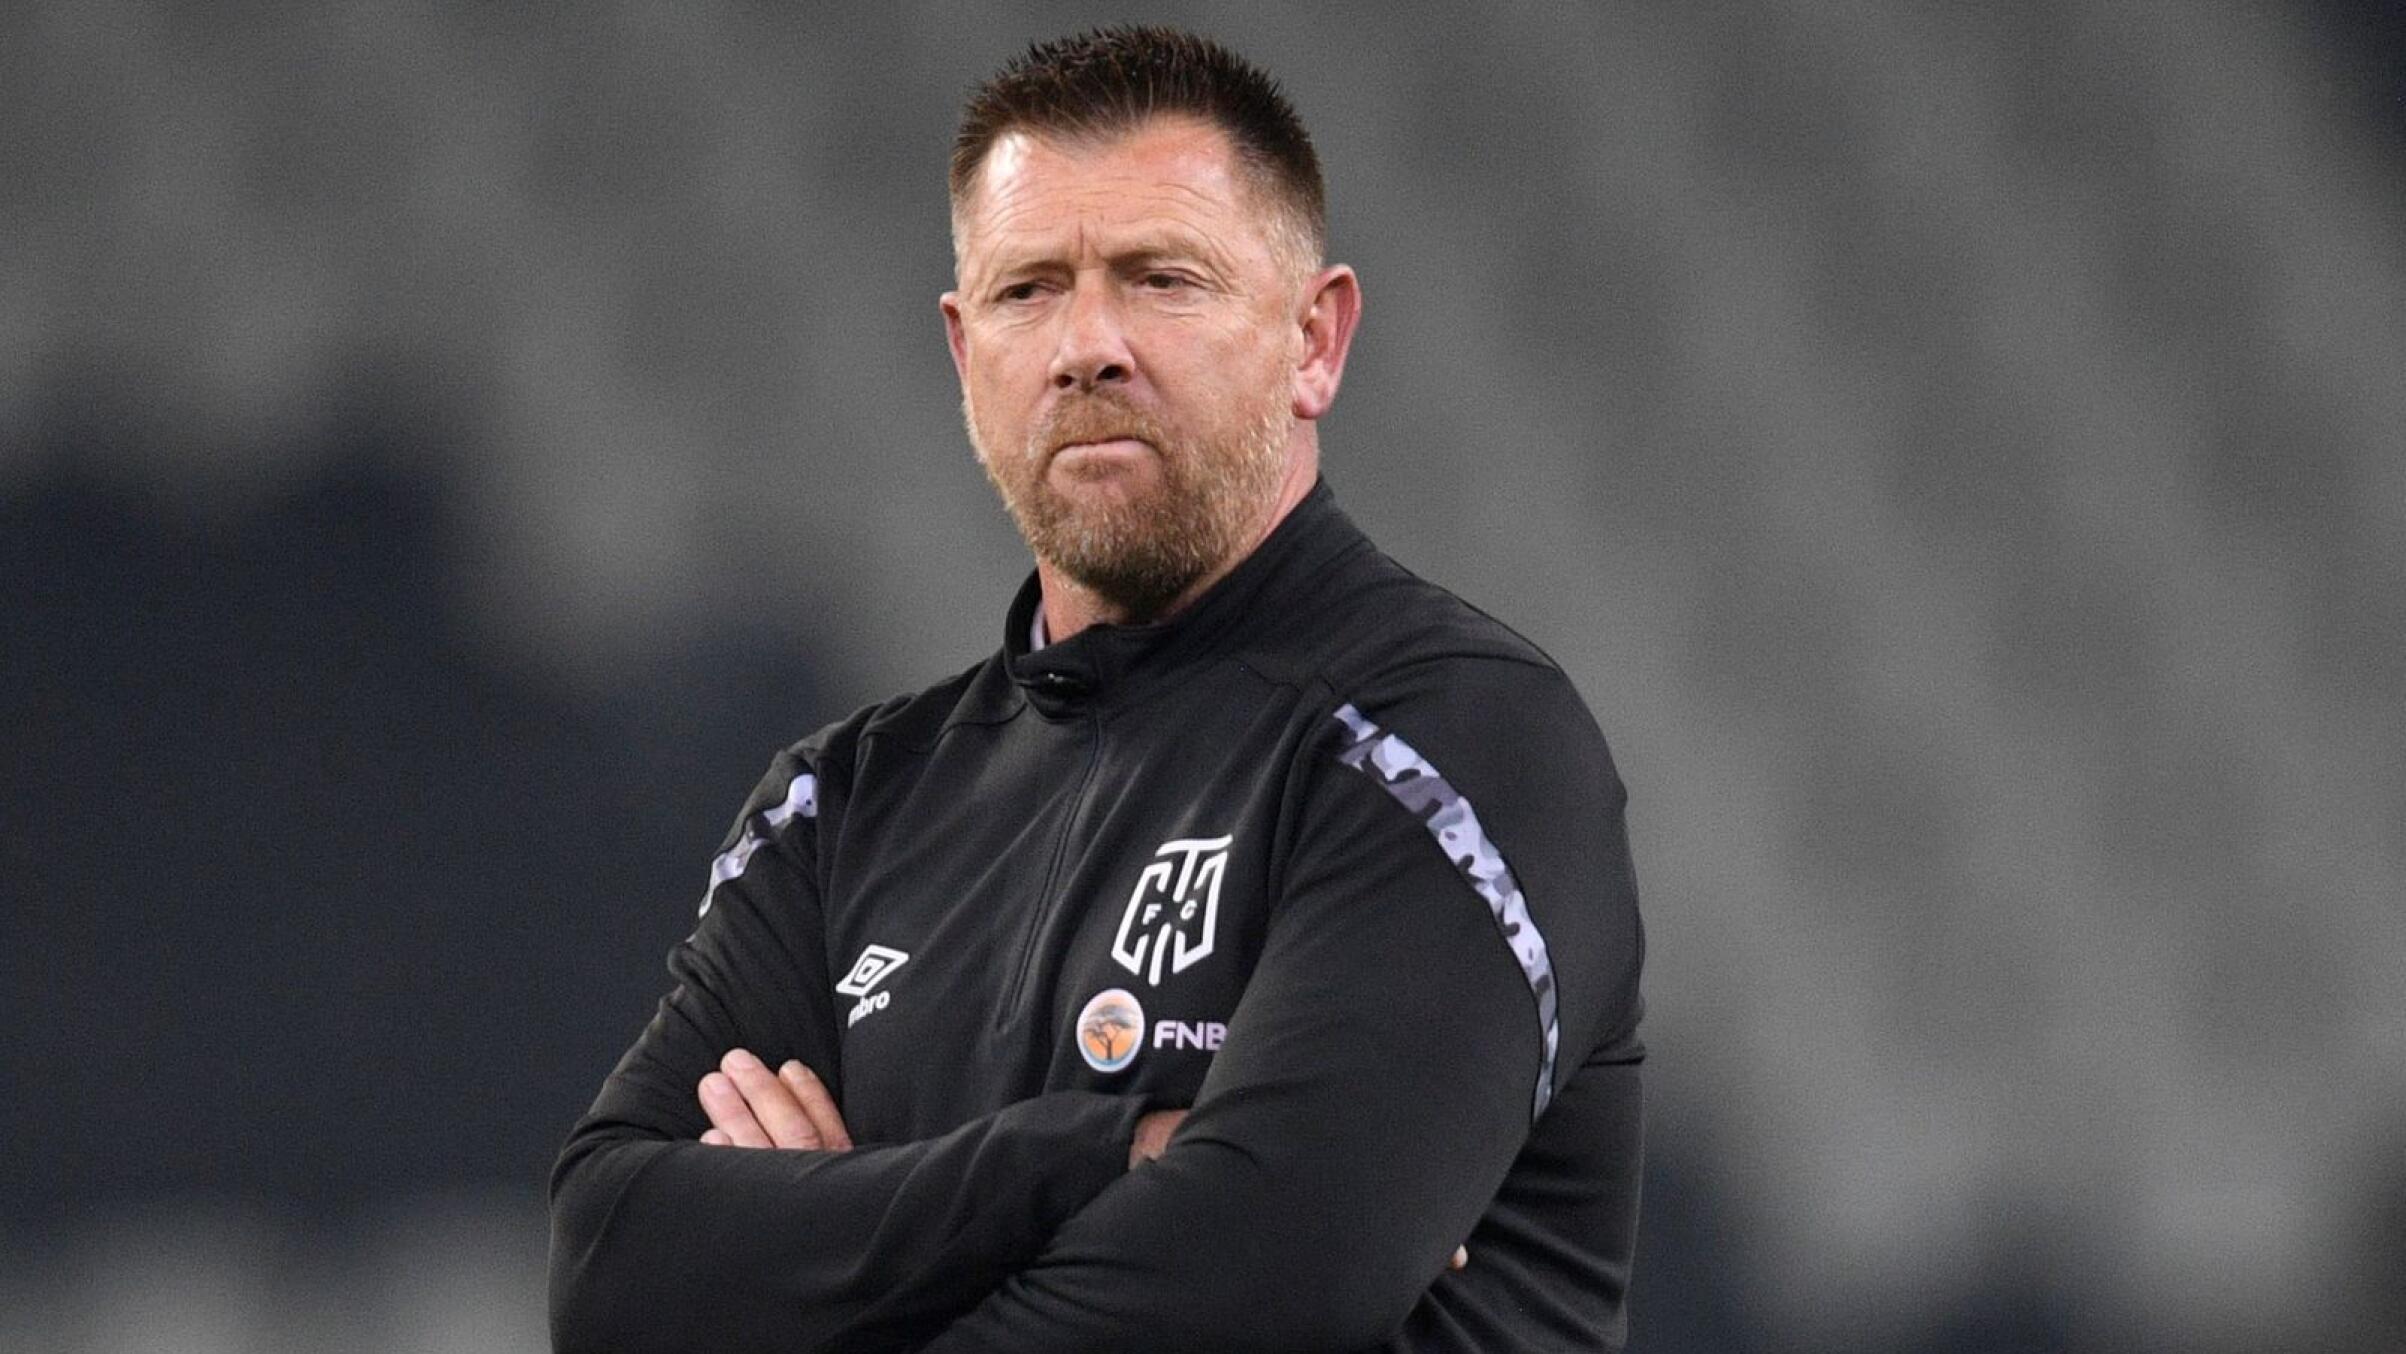 Cape Town City head coach Eric Tinkler won’t be in the dugout when his team face AS Otoho in the second leg of their CAF Champions League preliminary round